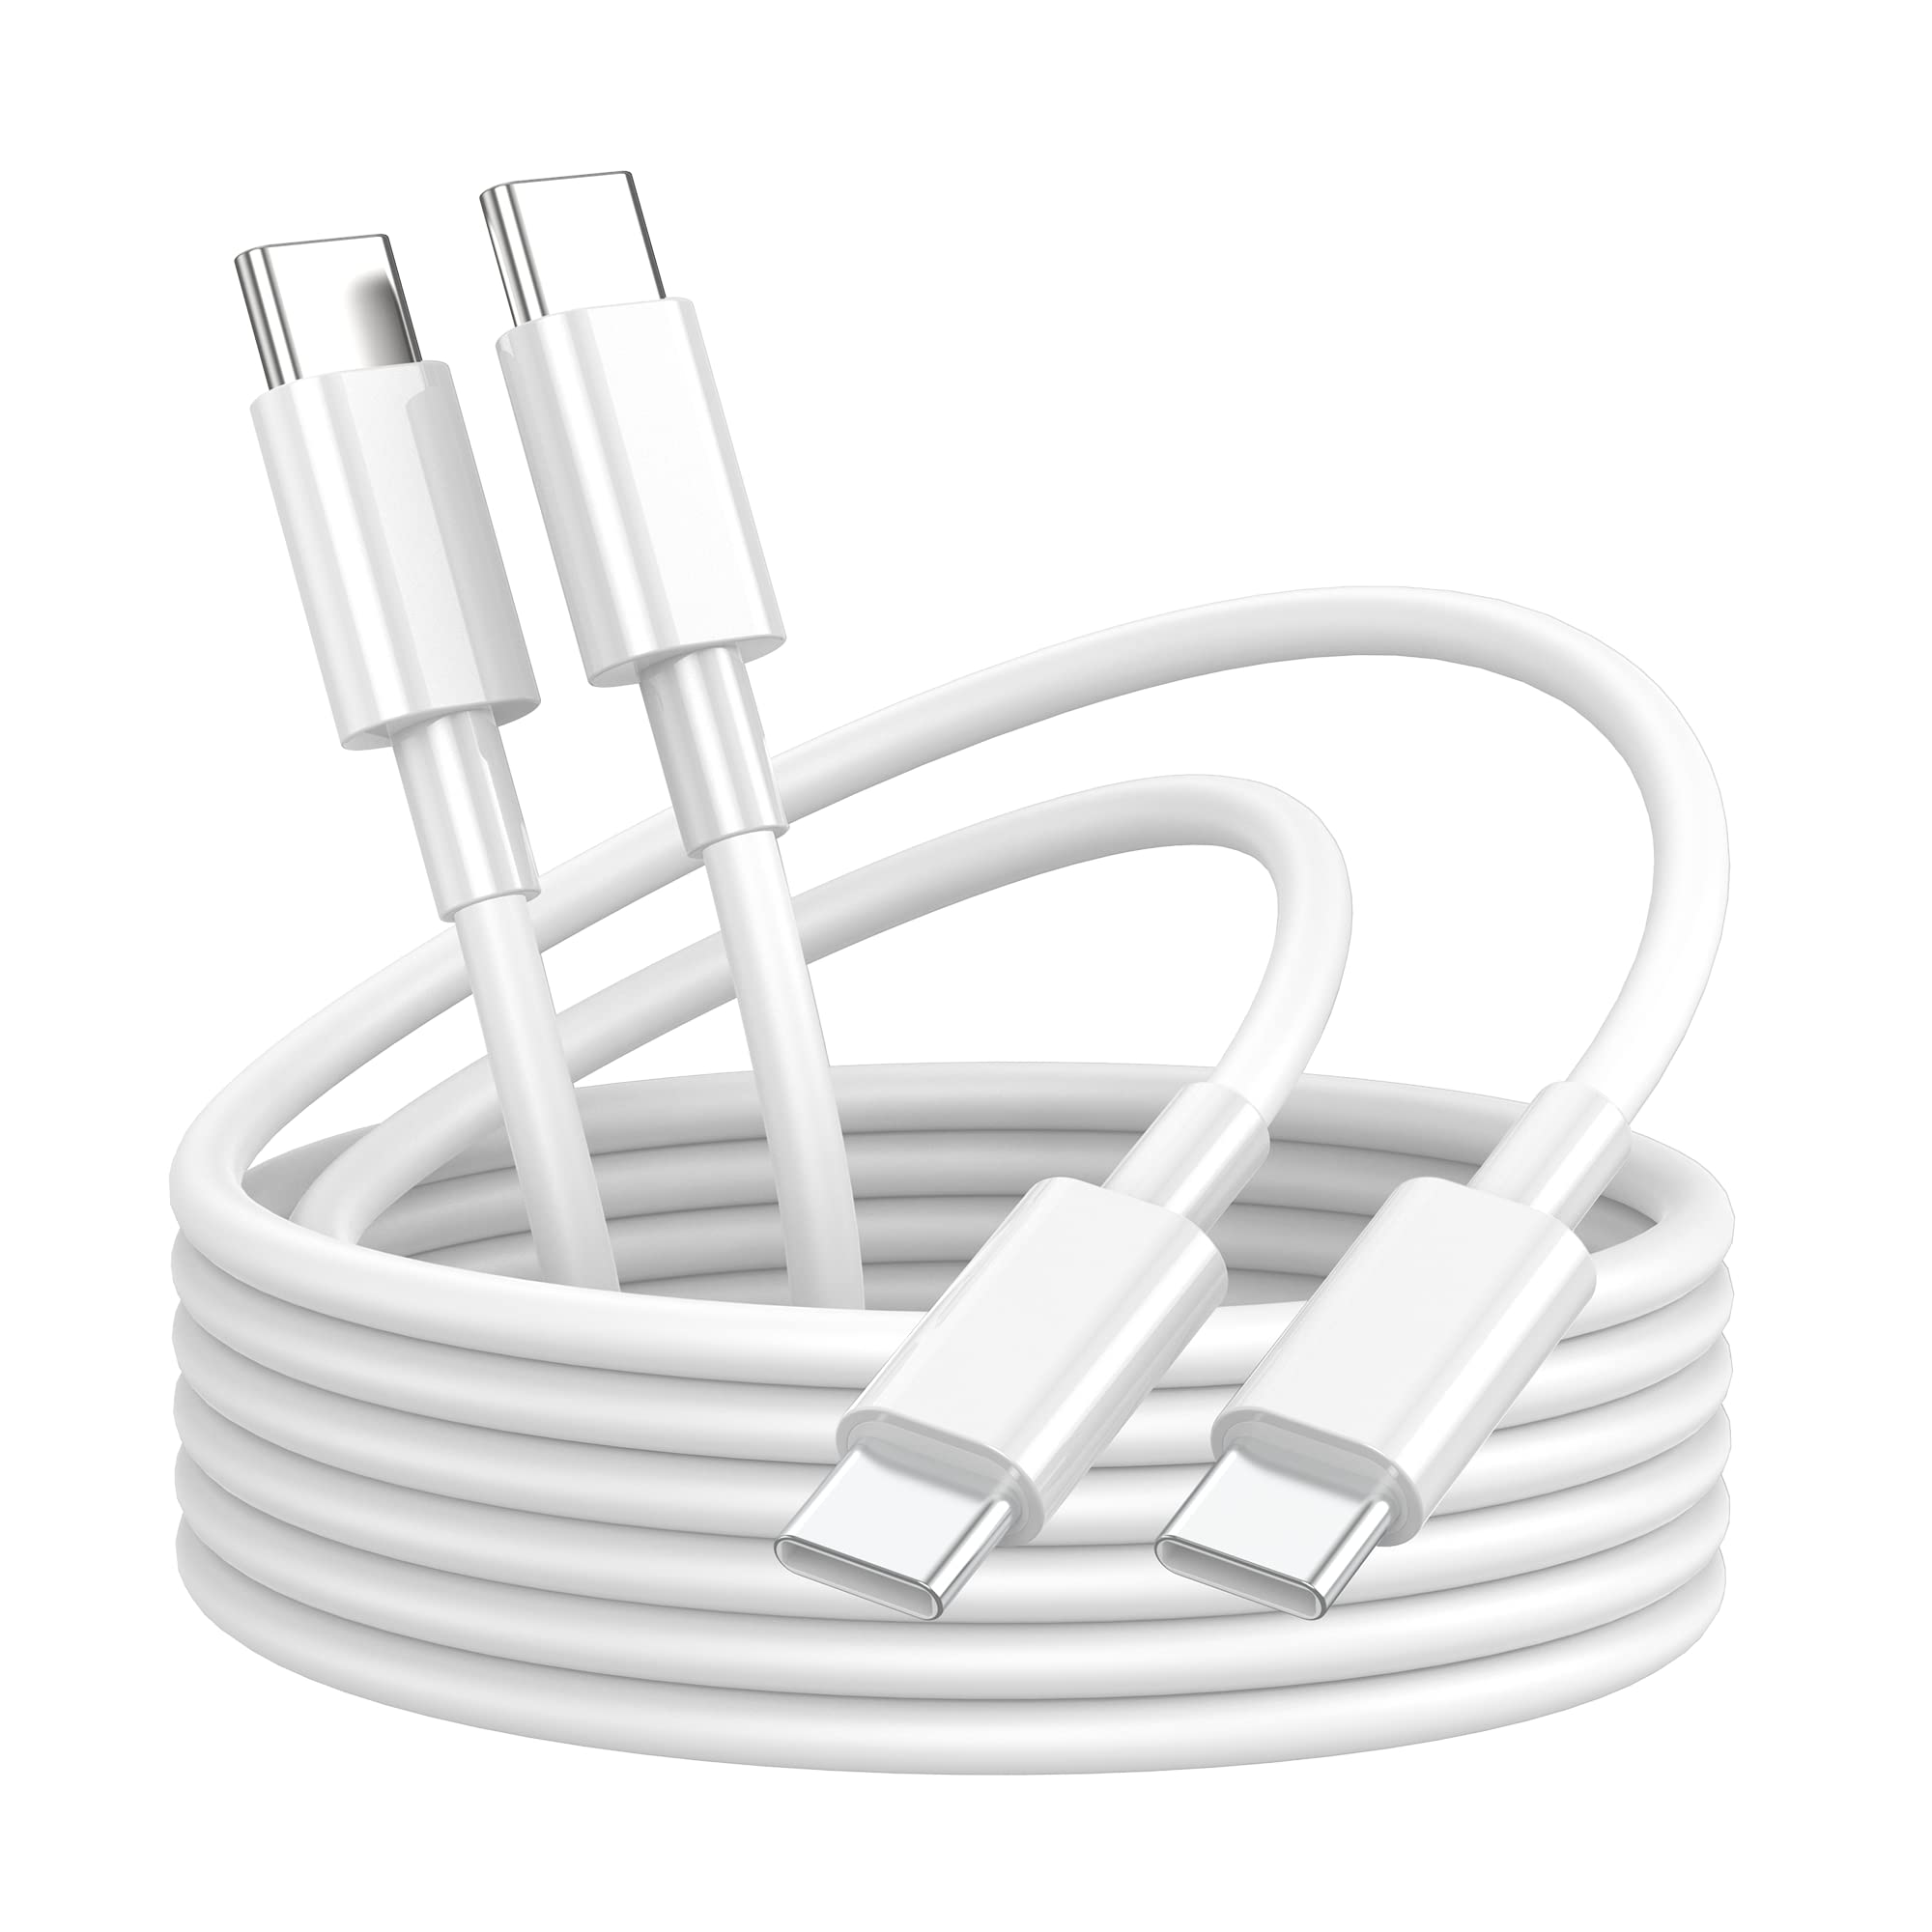 Apple USB-C Charge Cable Charging Cord 1m | USB-C for iPad, MacBook, Mac